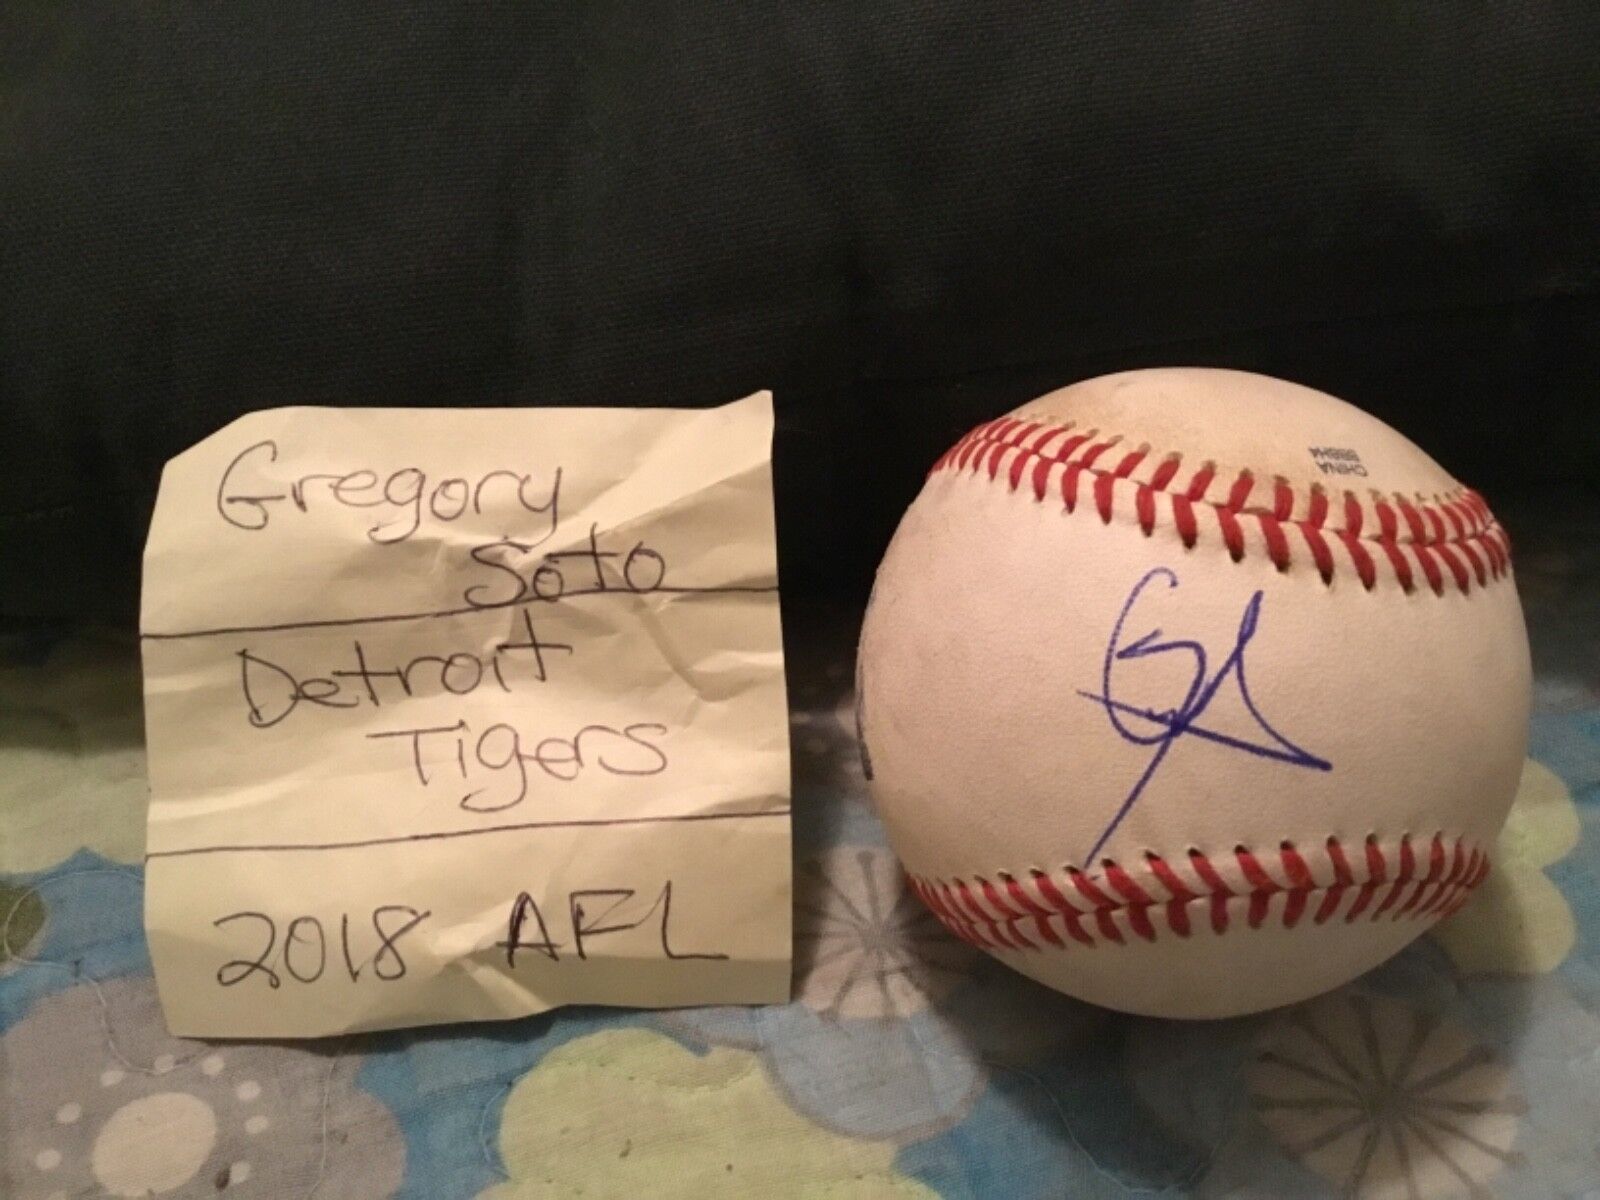 GREGORY SOTO SIGNED MINOR LEAGUE BASEBALL/ DETROIT TIGERS PITCHING PROSPECT